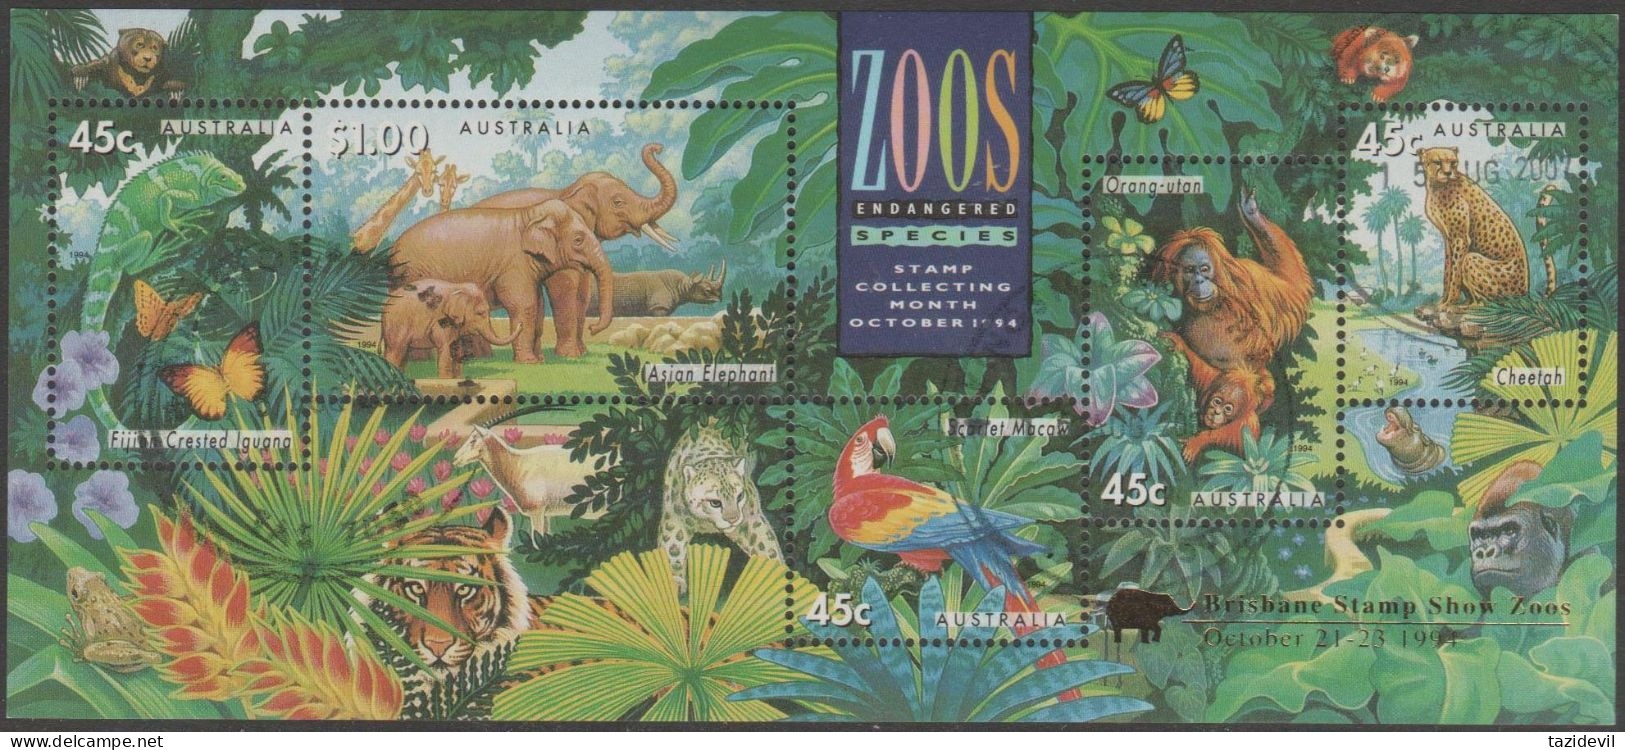 AUSTRALIA - USED - 1994 $2.80 Zoo's Souvenir Sheet Overprinted "Brisbane Stamp Show Zoos" - Used Stamps